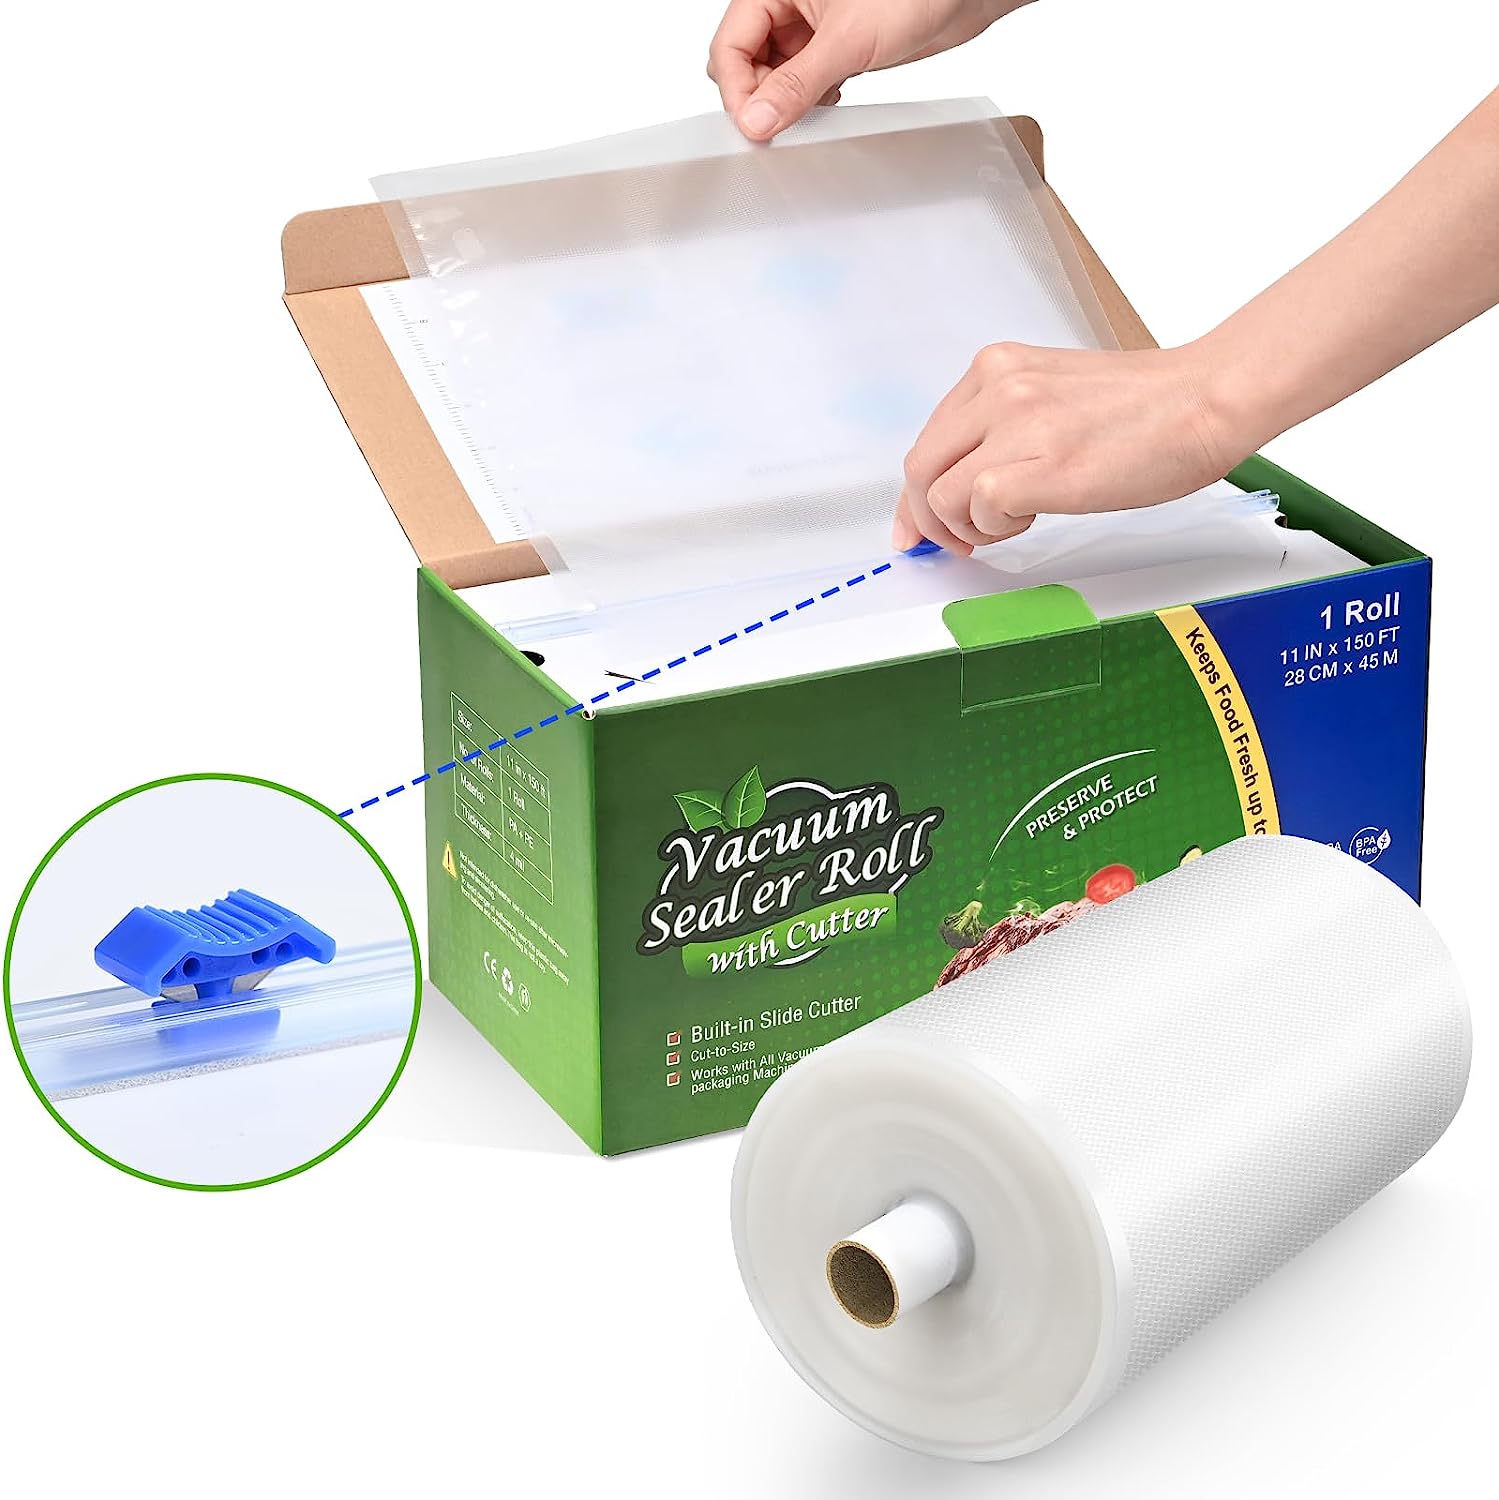 FoodVacBags 11 inch x 50 ft. Rolls Of Vacuum Sealer Bags - 2 Pack